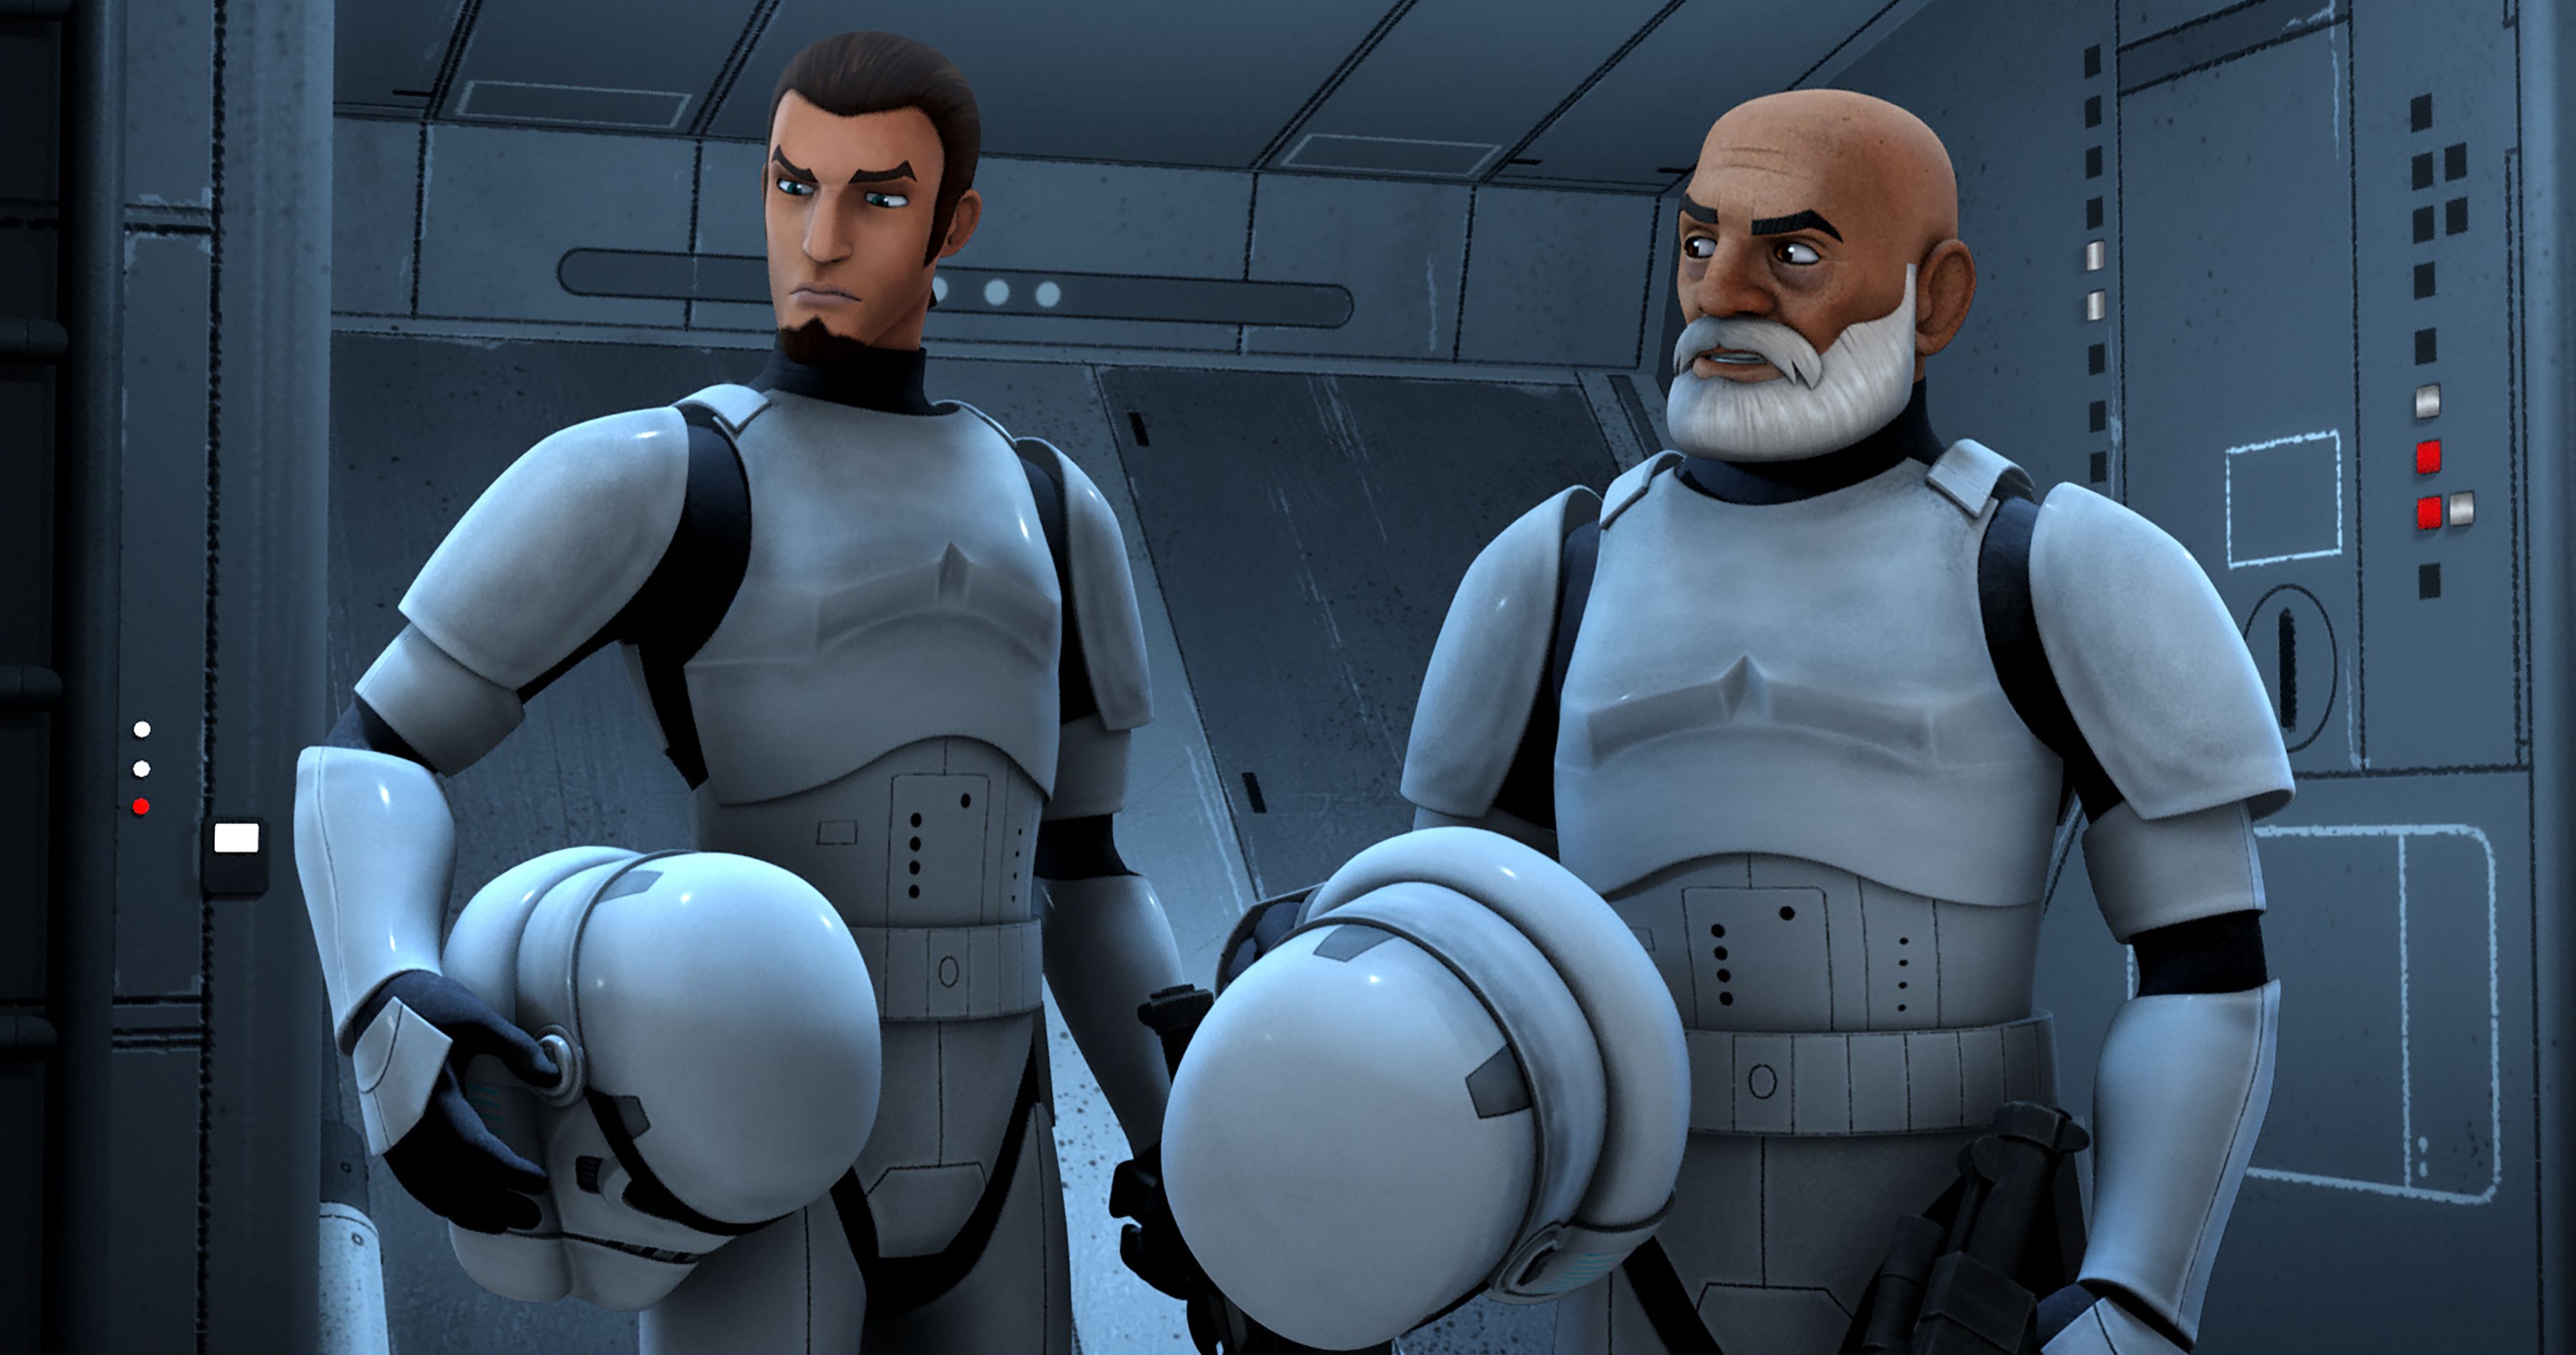 Clone Wars Director Punts Order 66 Plot Hole Into Space, Won't Get Hung Up on Continuity